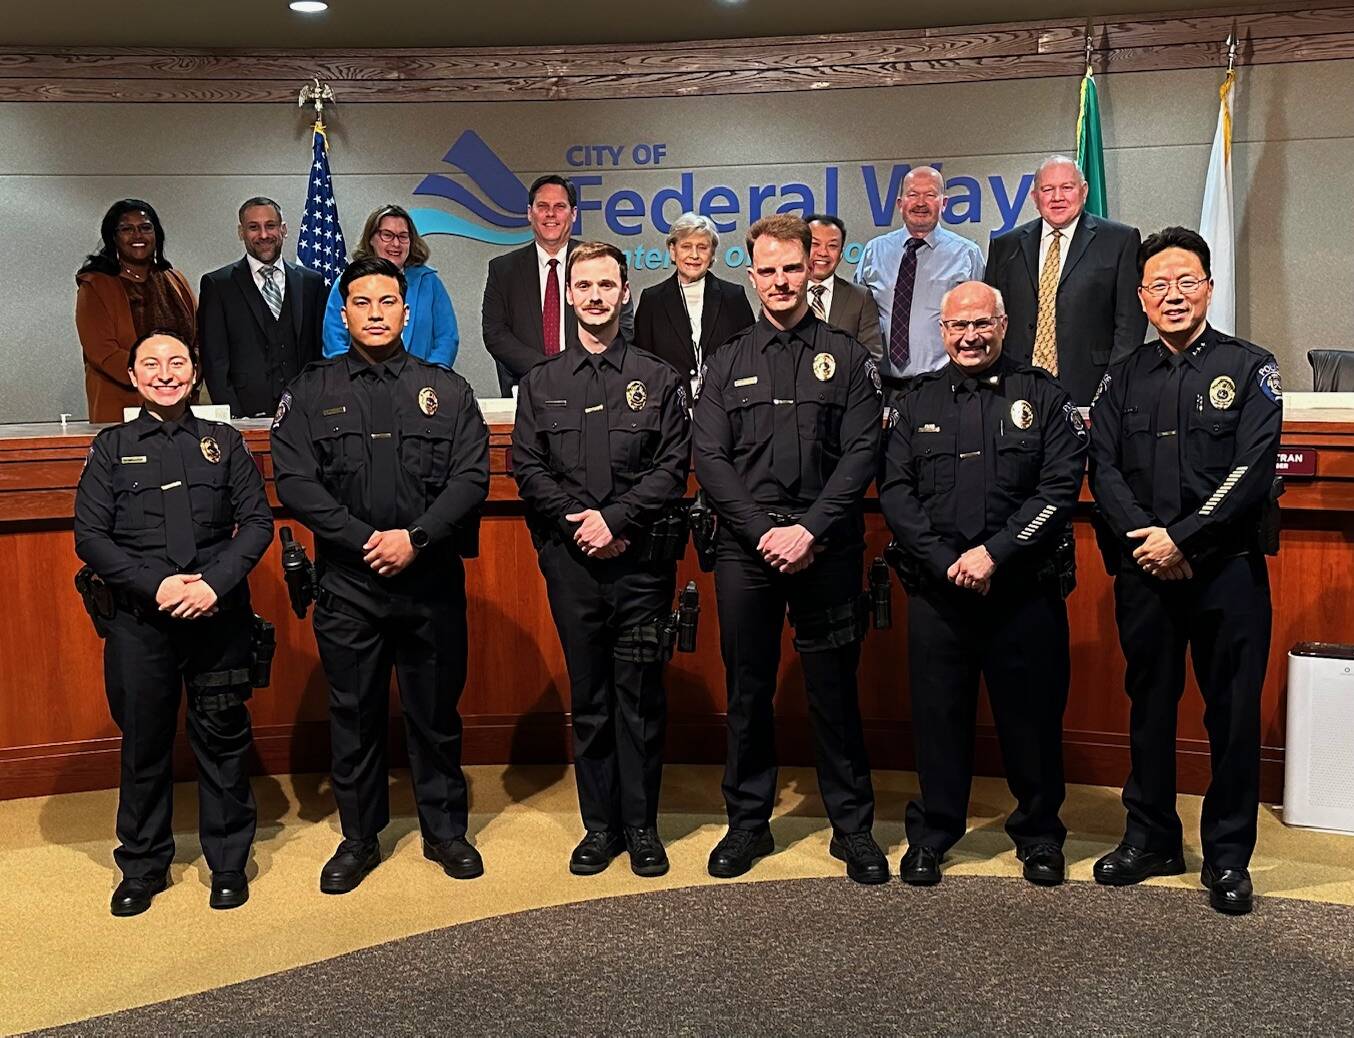 Photo by David Solano / City of Federal Way
New police officers at the Federal Way Police Department.